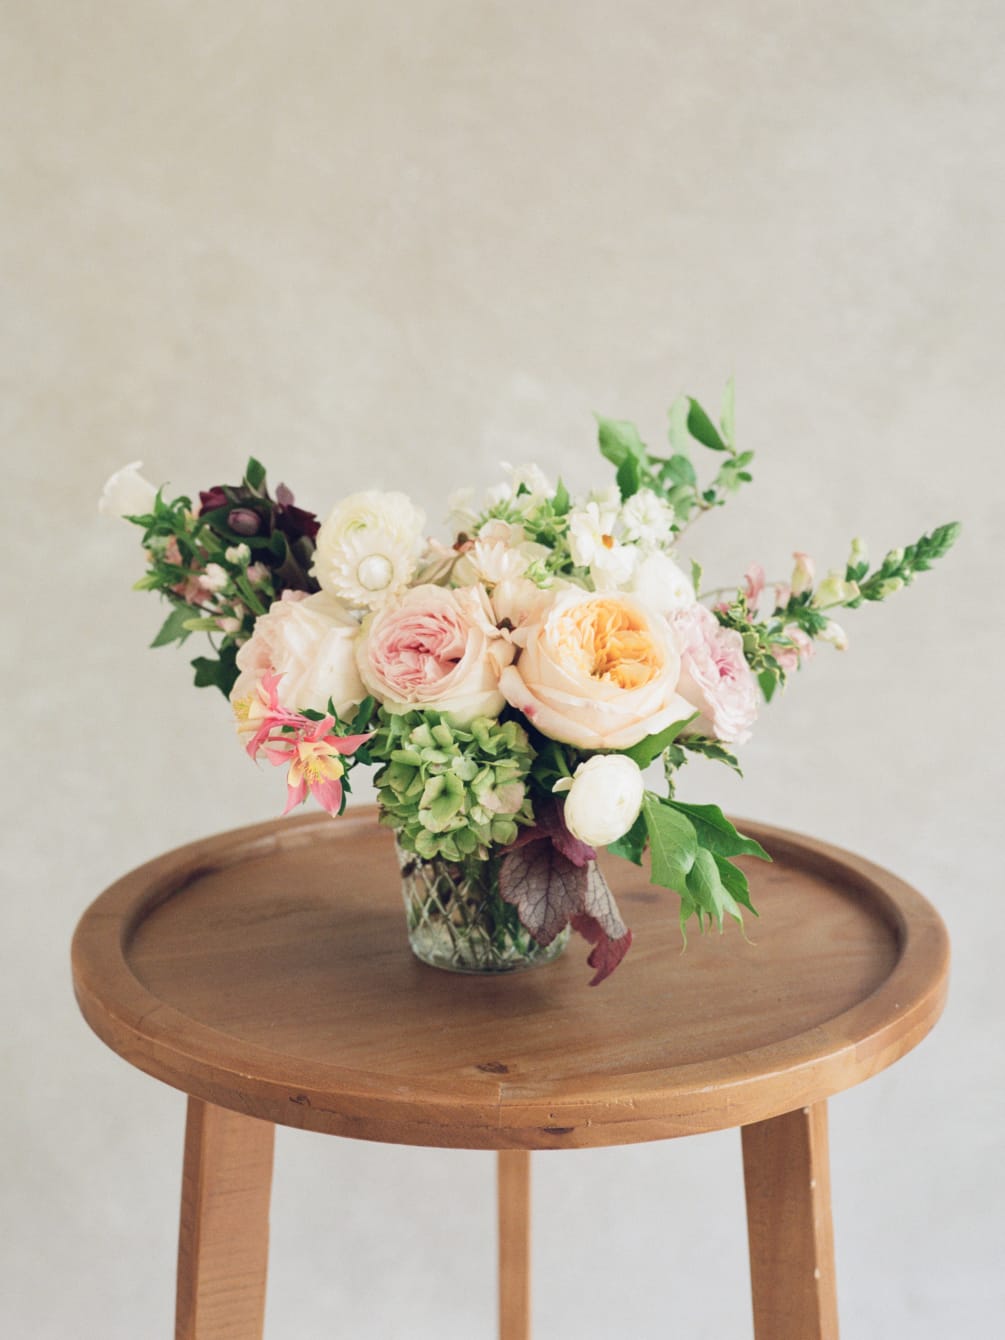 A soft and airy arrangement designed in a glass vase. In a